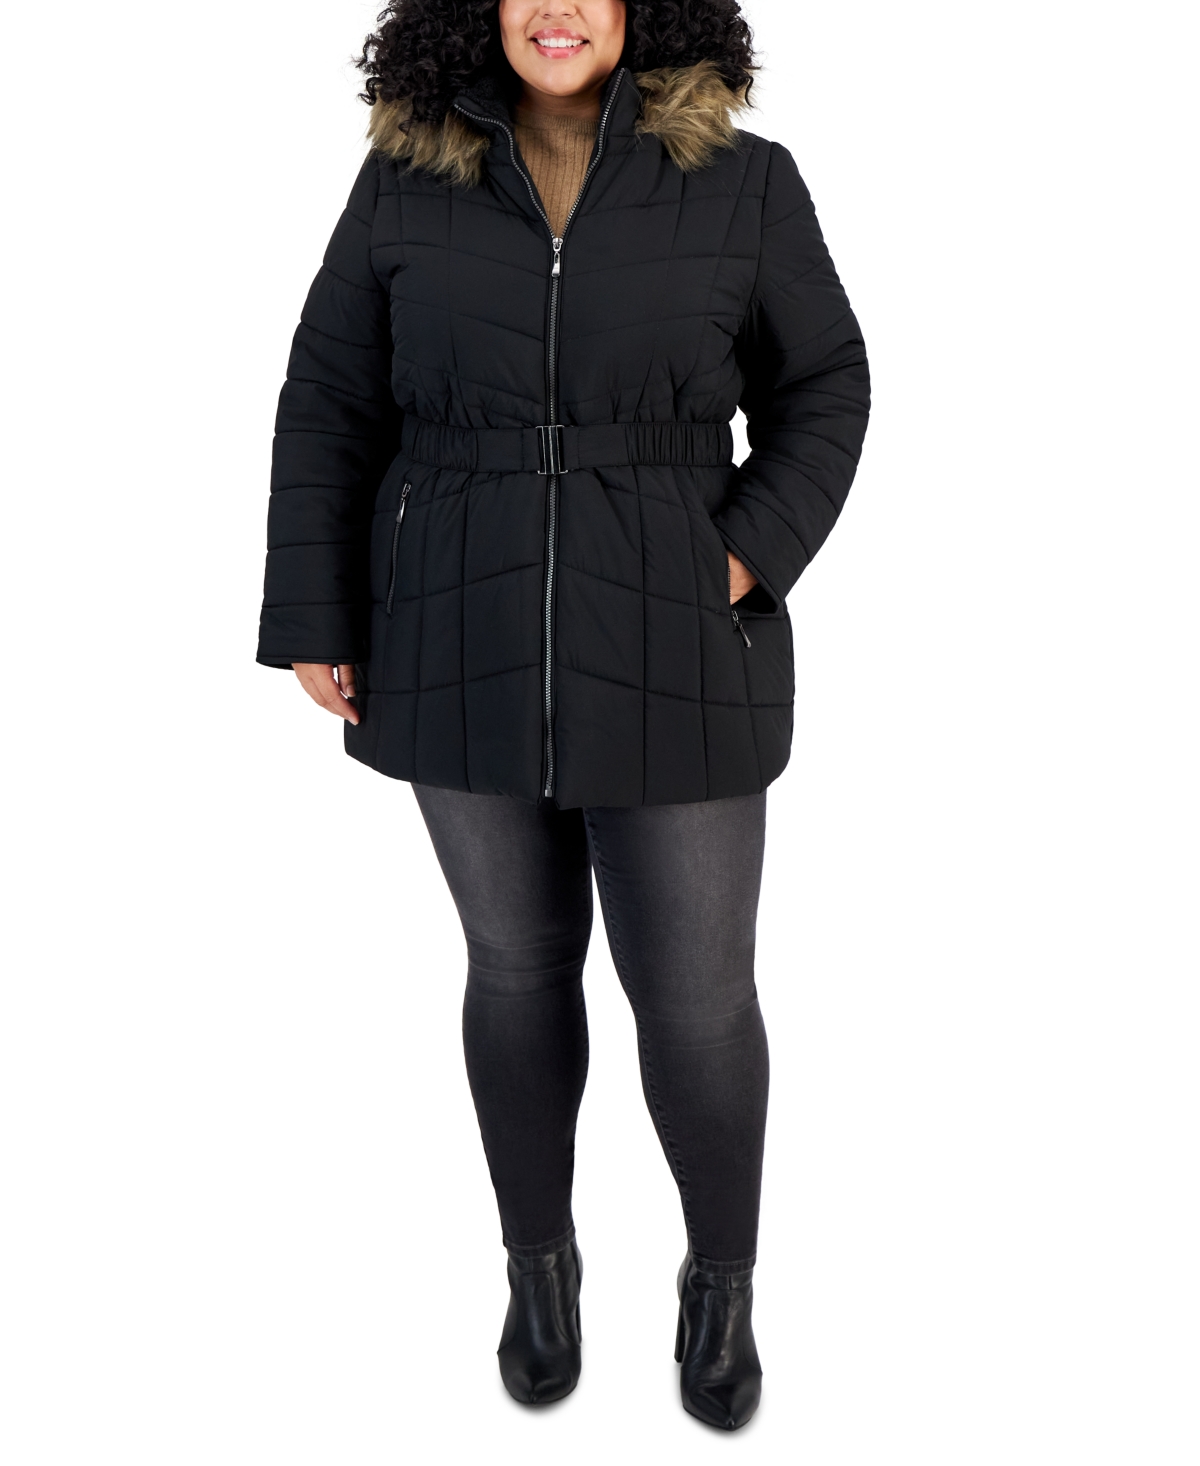 Maralyn & Me Juniors' Plus Size Belted Faux-Fur-Hooded Puffer Coat